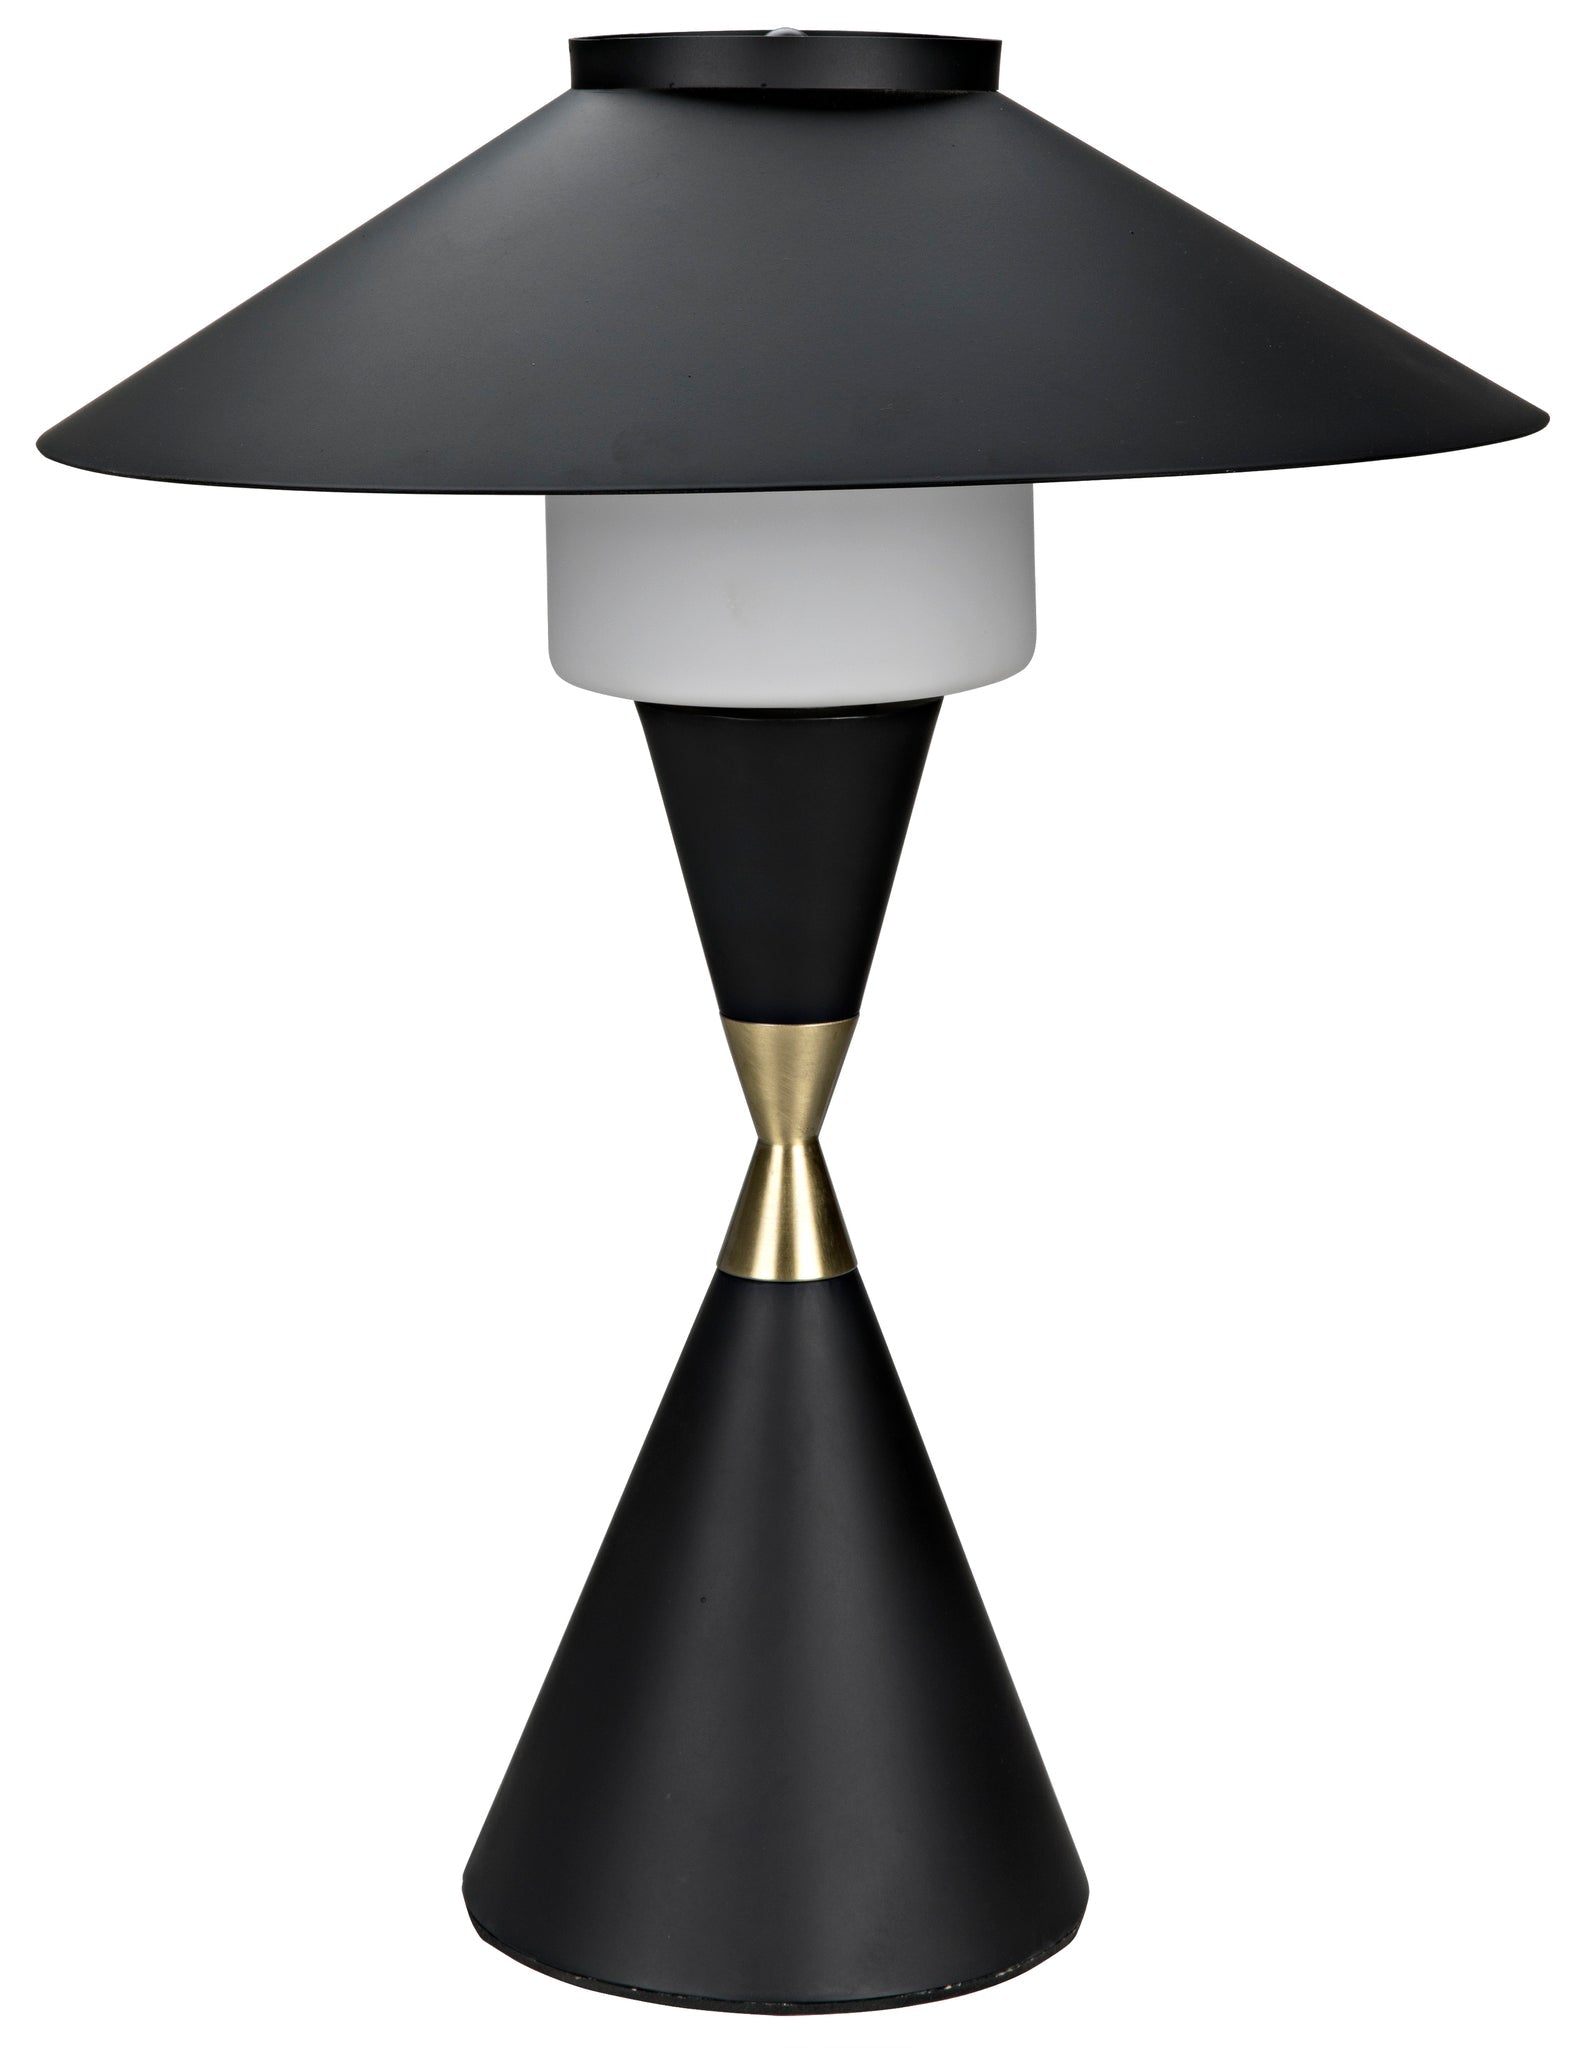 Lucia Table Lamp, Black Metal with Brass Detail - Decor - Tipplergoods